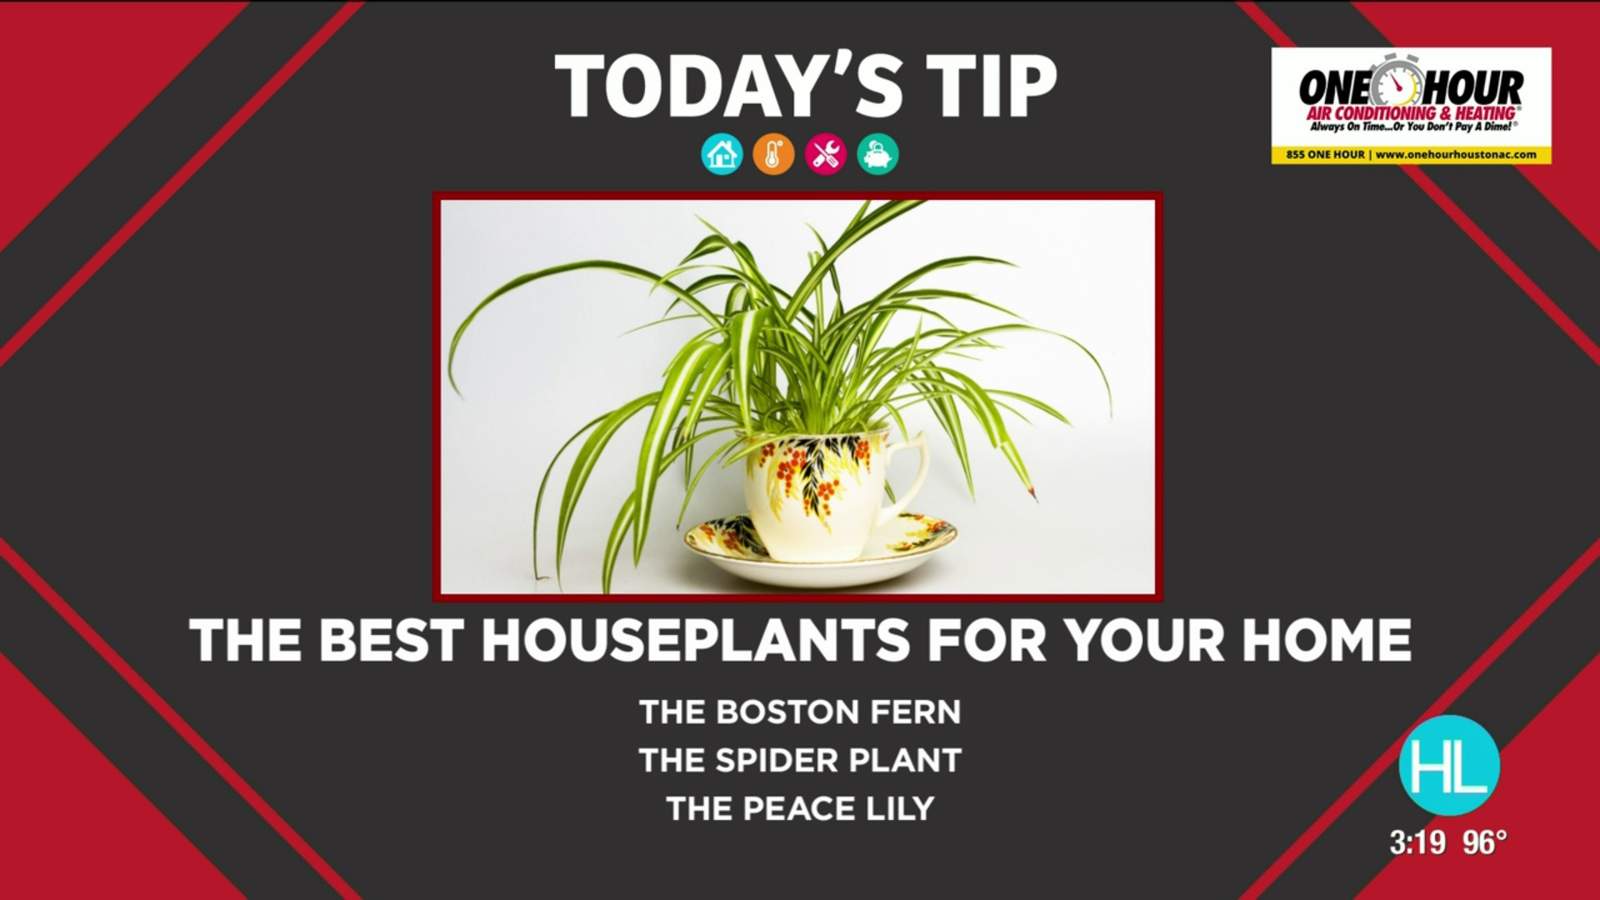 Tip Tuesday: Houseplants can help improve your homes air quality